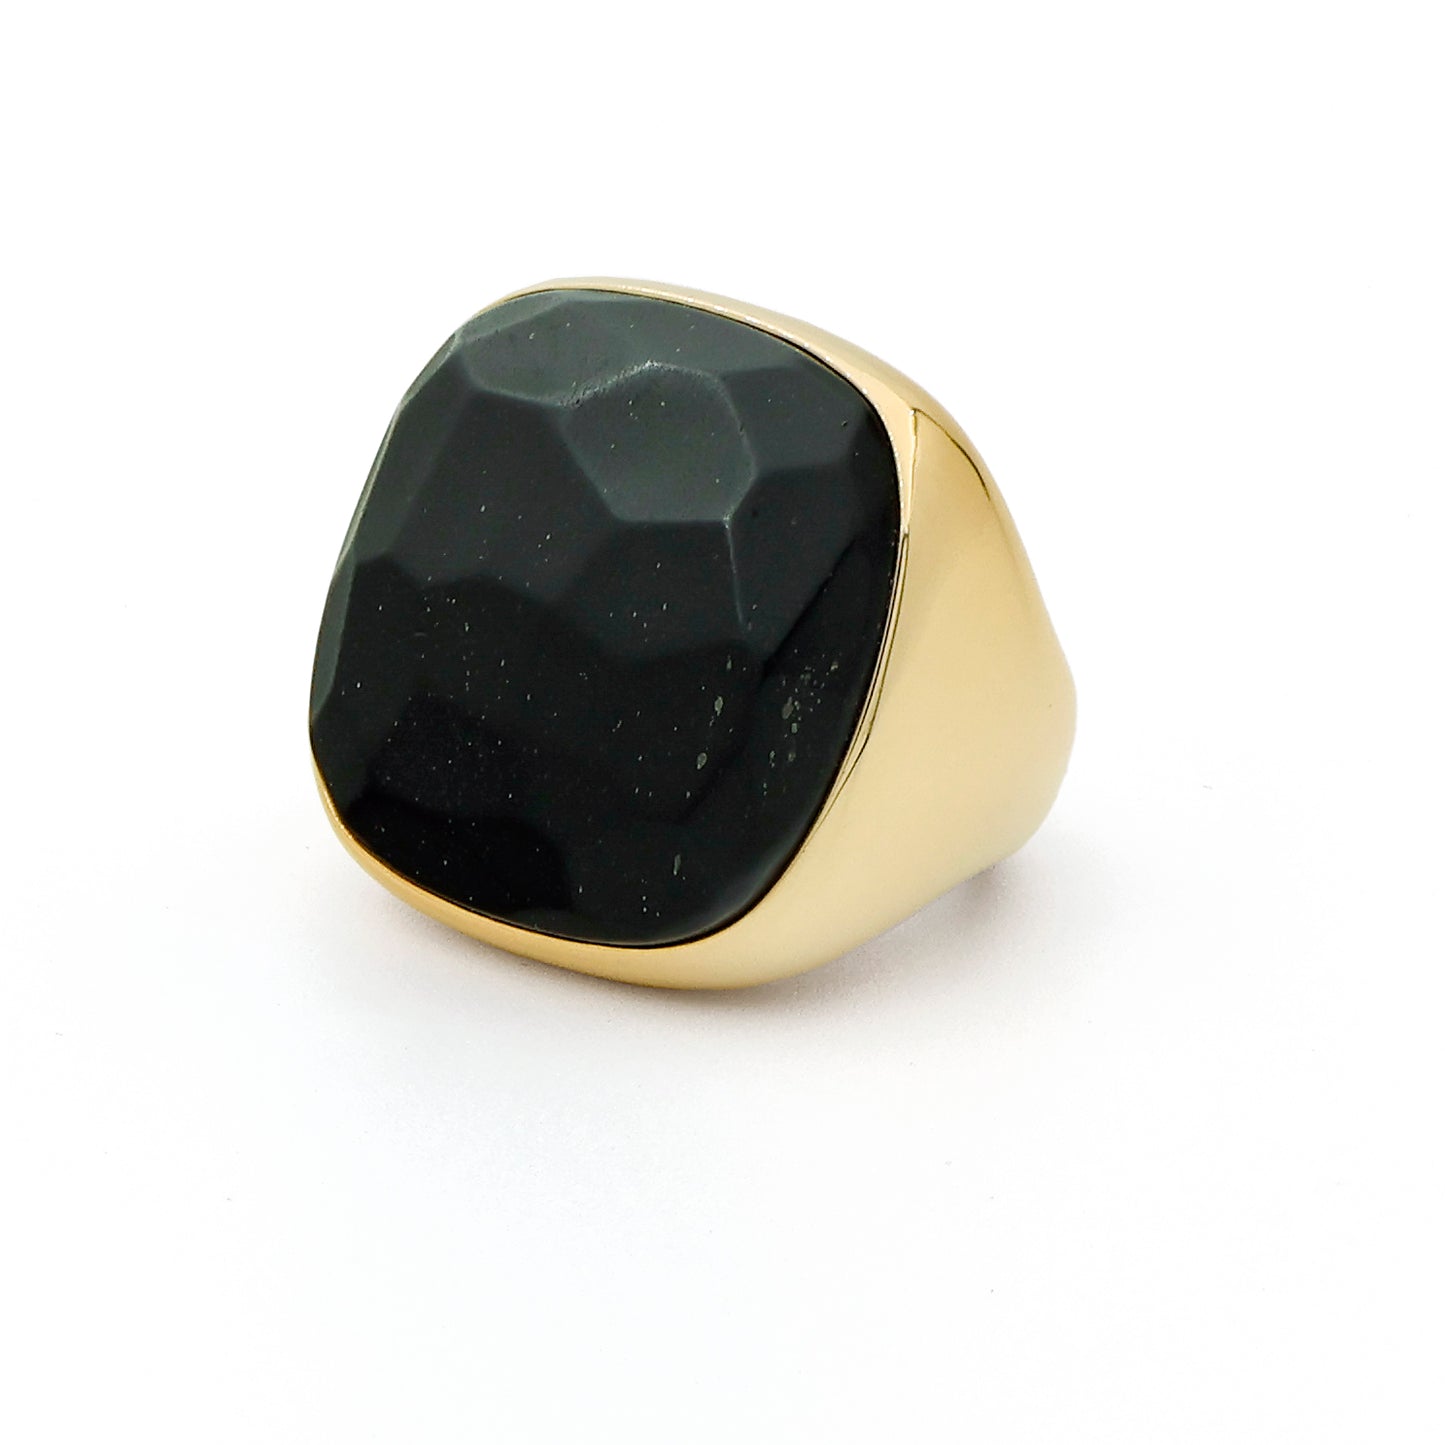 Pomellato Victoria 18k Yellow Gold Ring with Faceted Black Jet